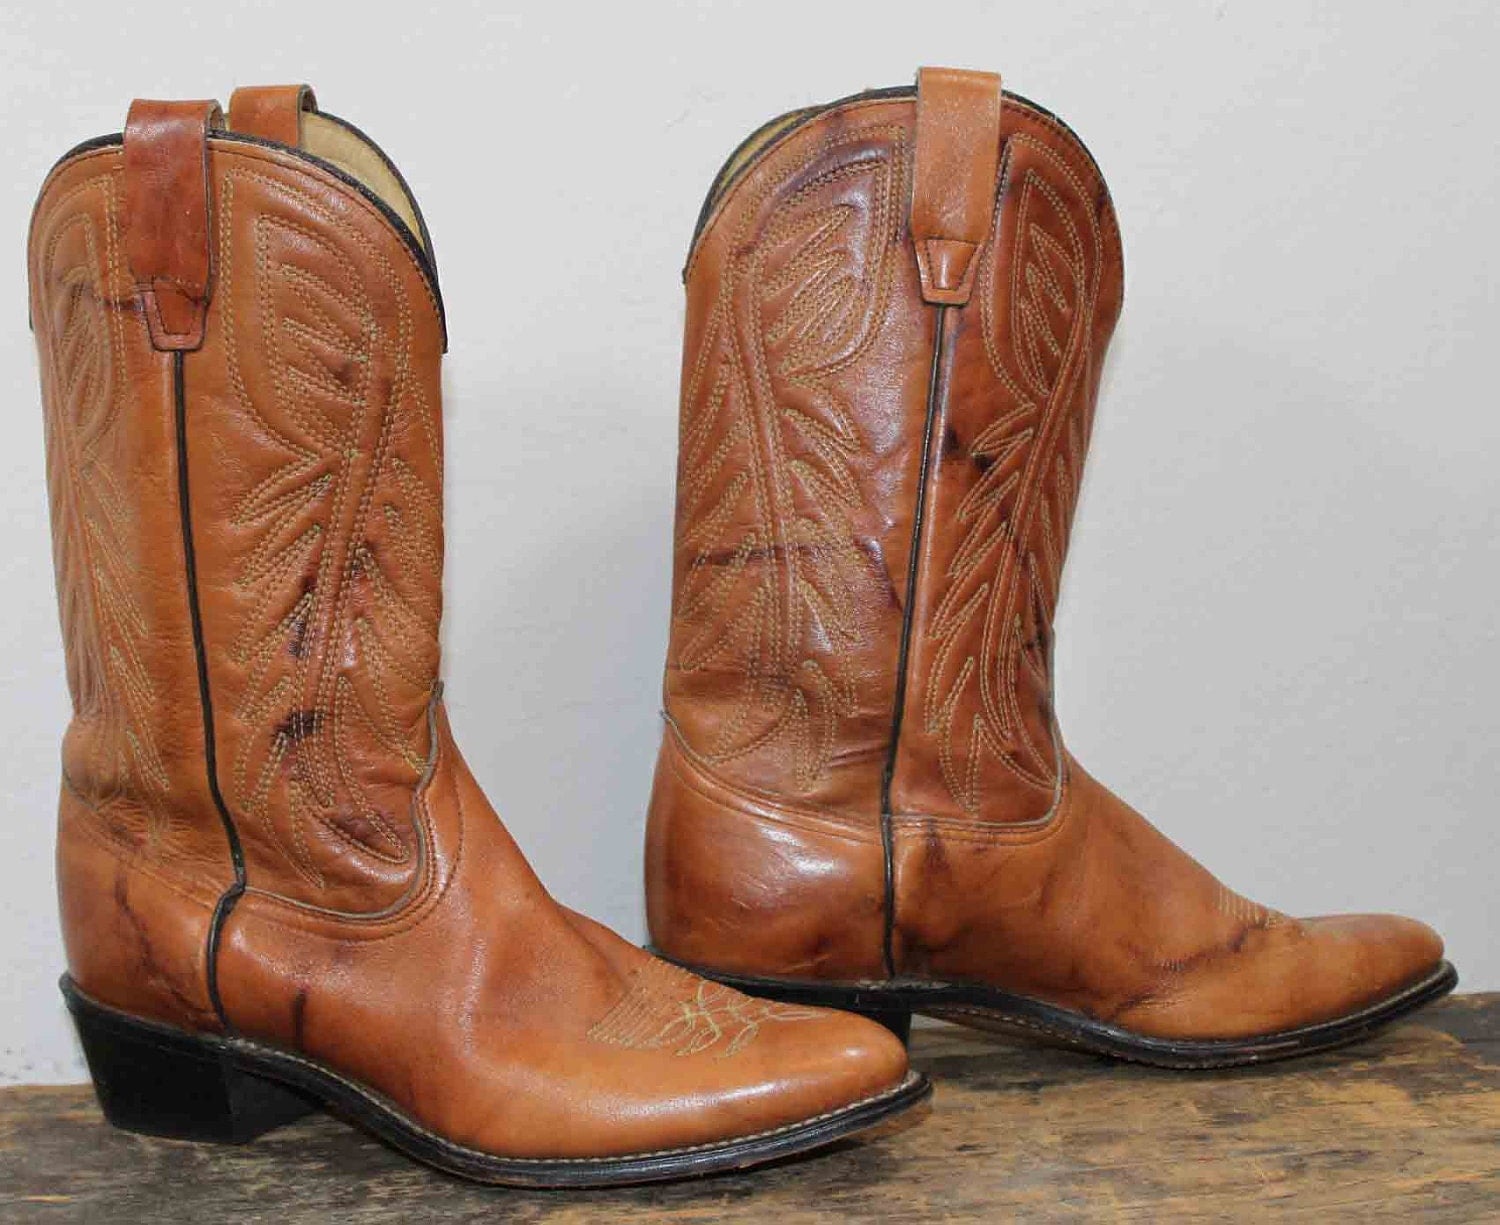 1970s Wrangler Cowboy Boots Mens Size 10 1/2 by RewindClothing